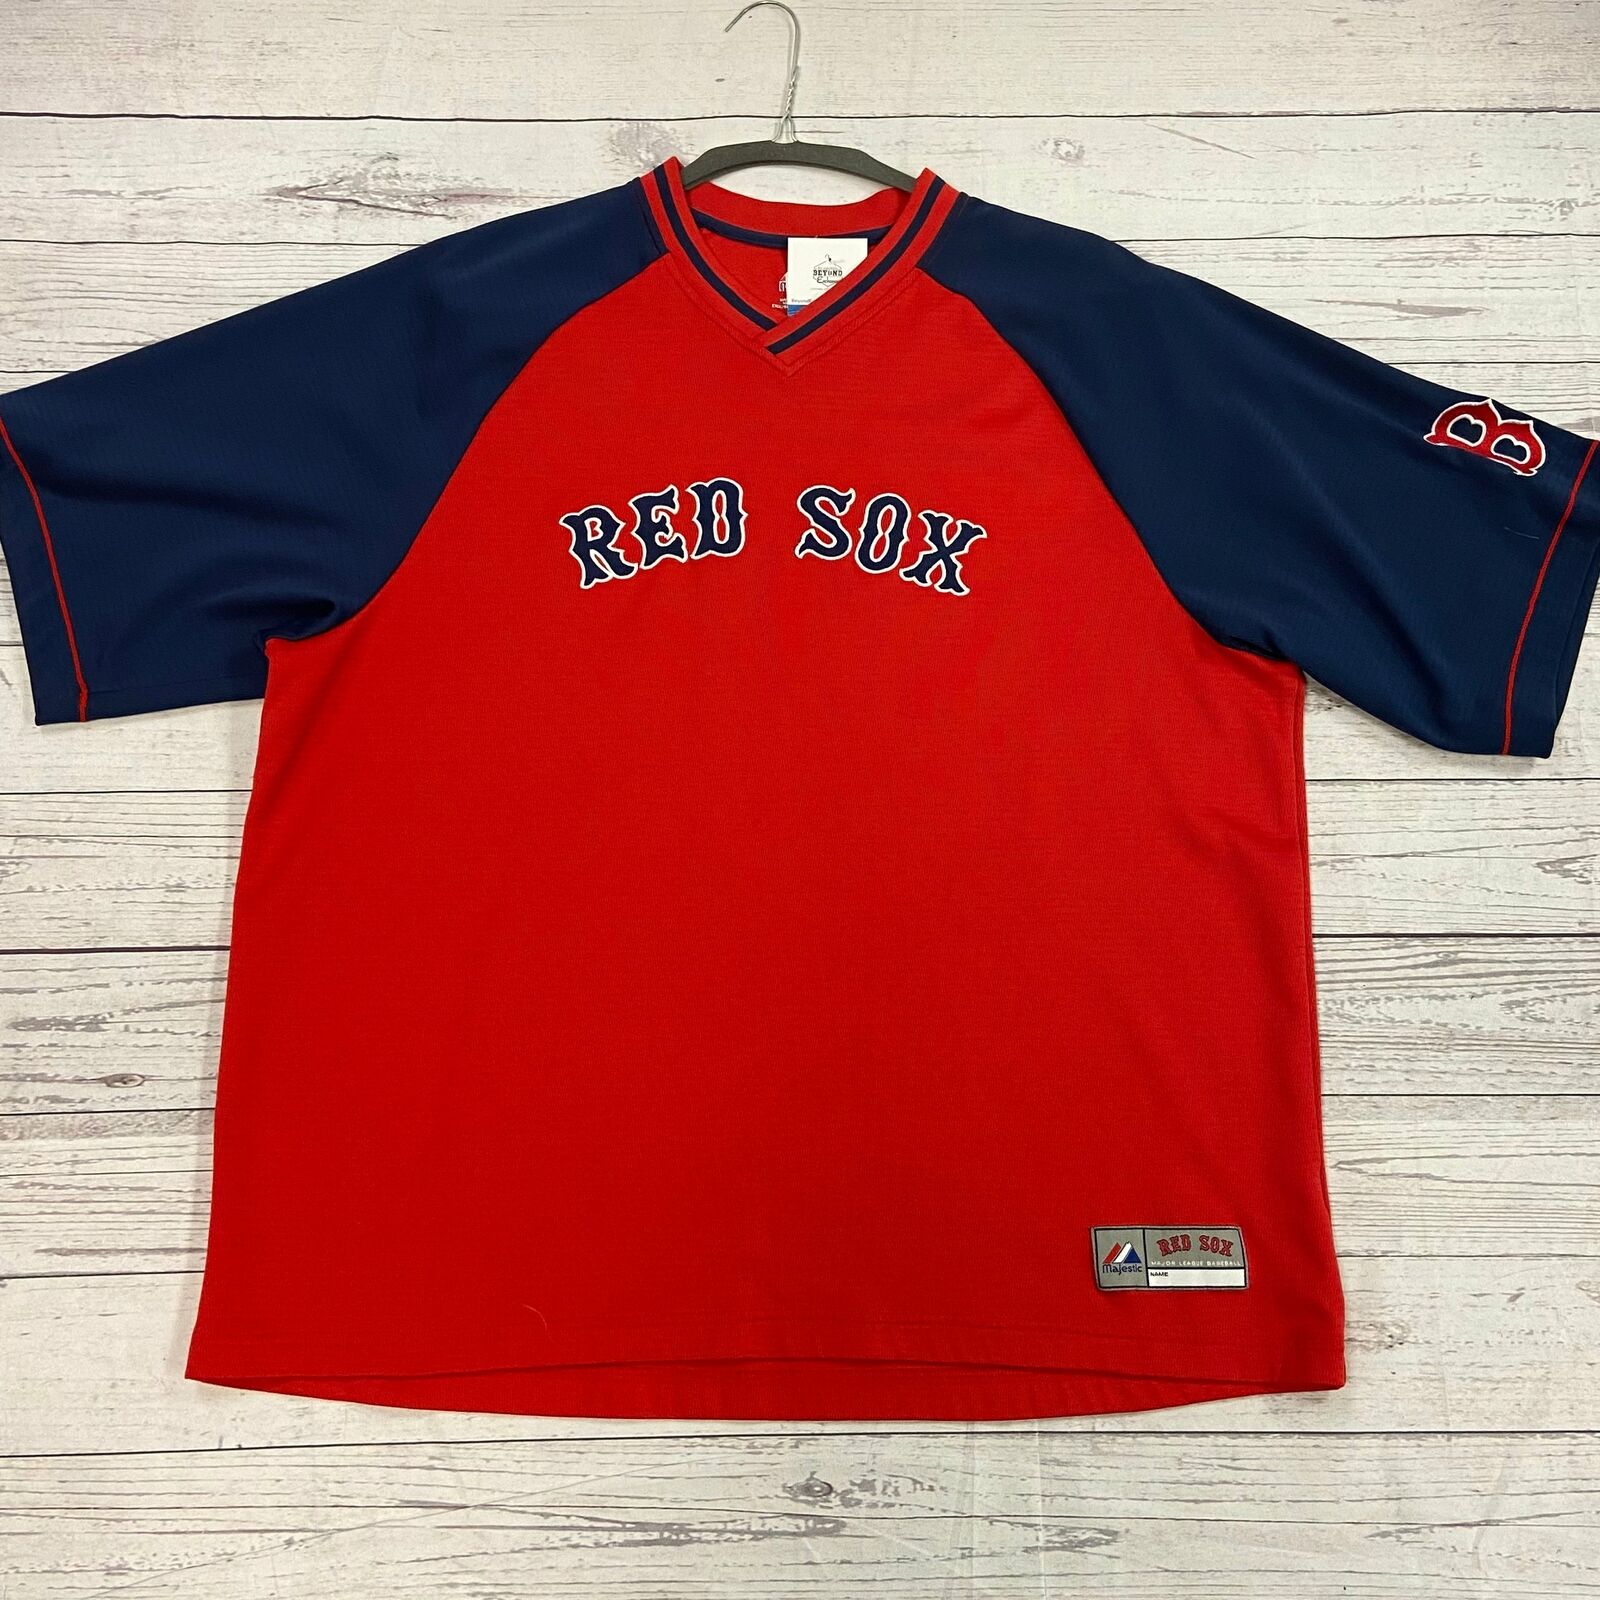 Boston Red Sox Unisex Adult MLB Jerseys for sale